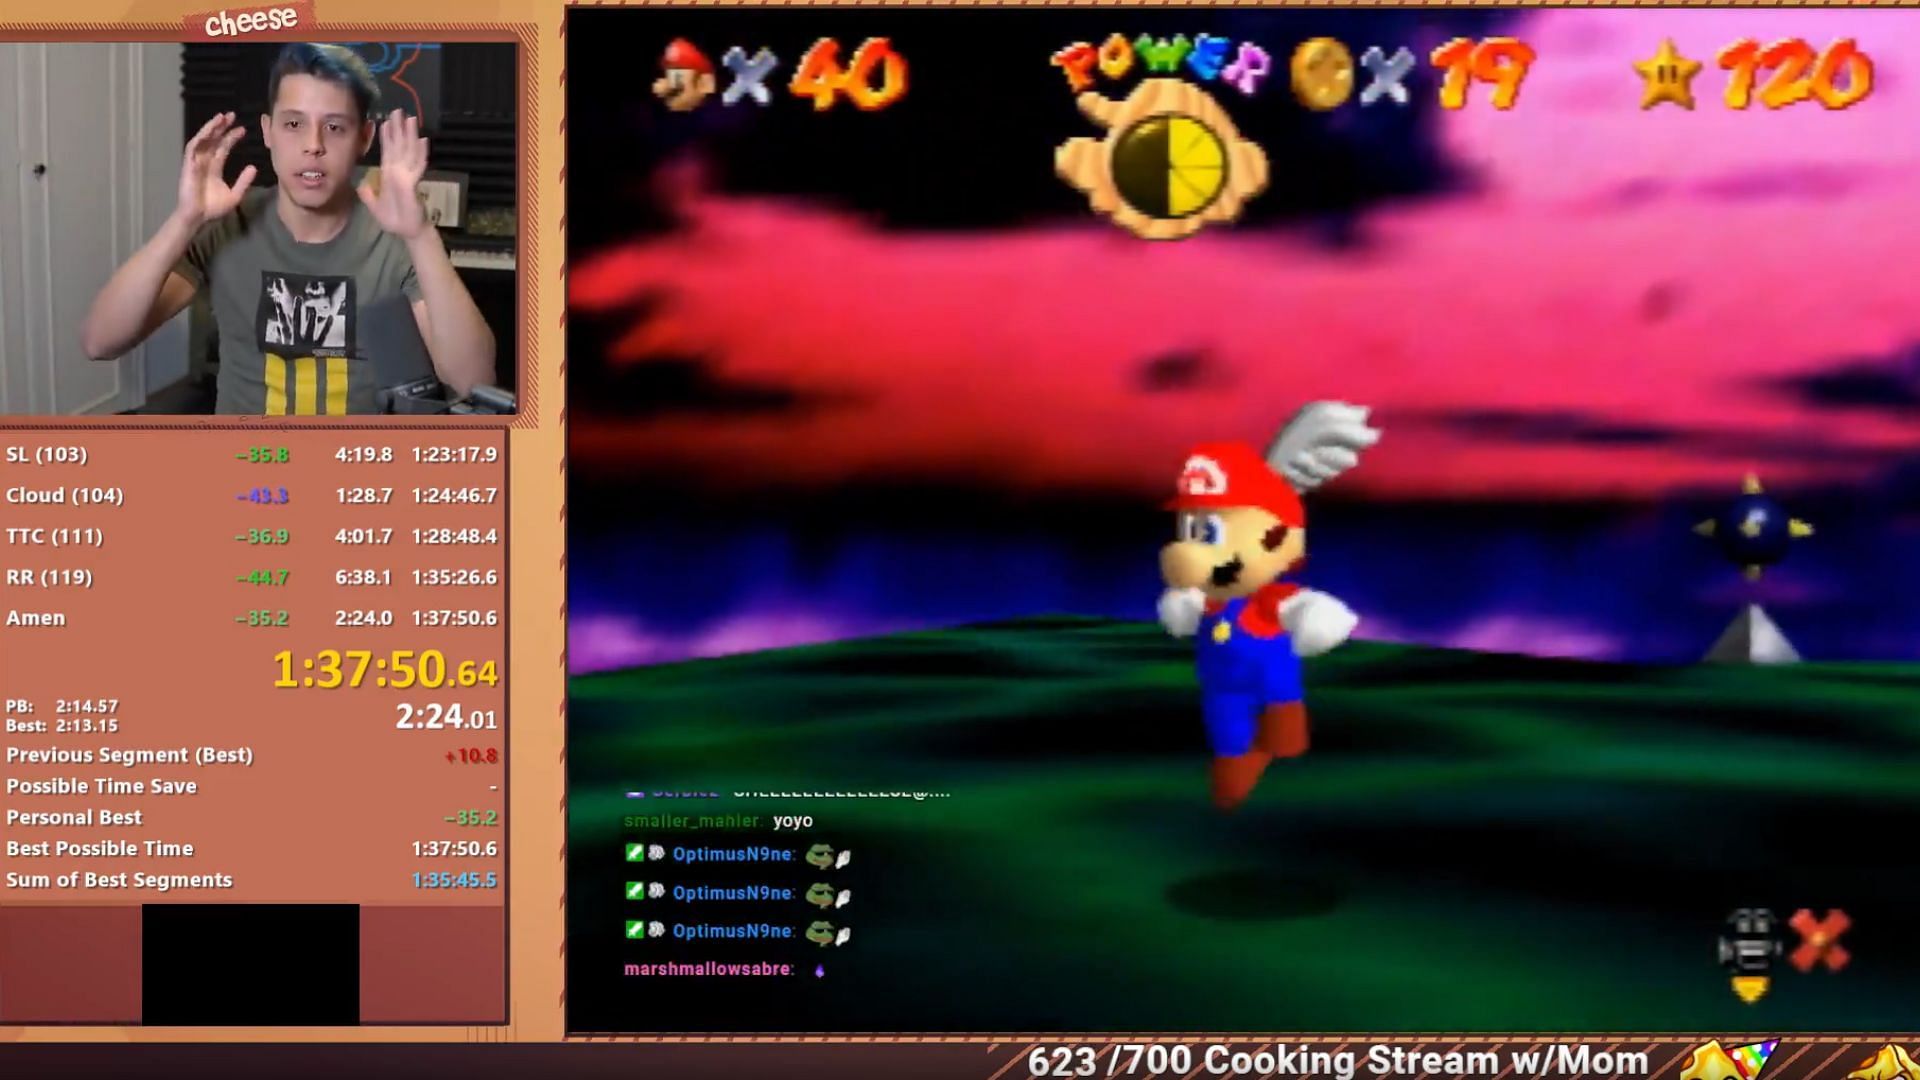 Cheese reclaims his 120 star WR (Image via Cheese/Twitch)